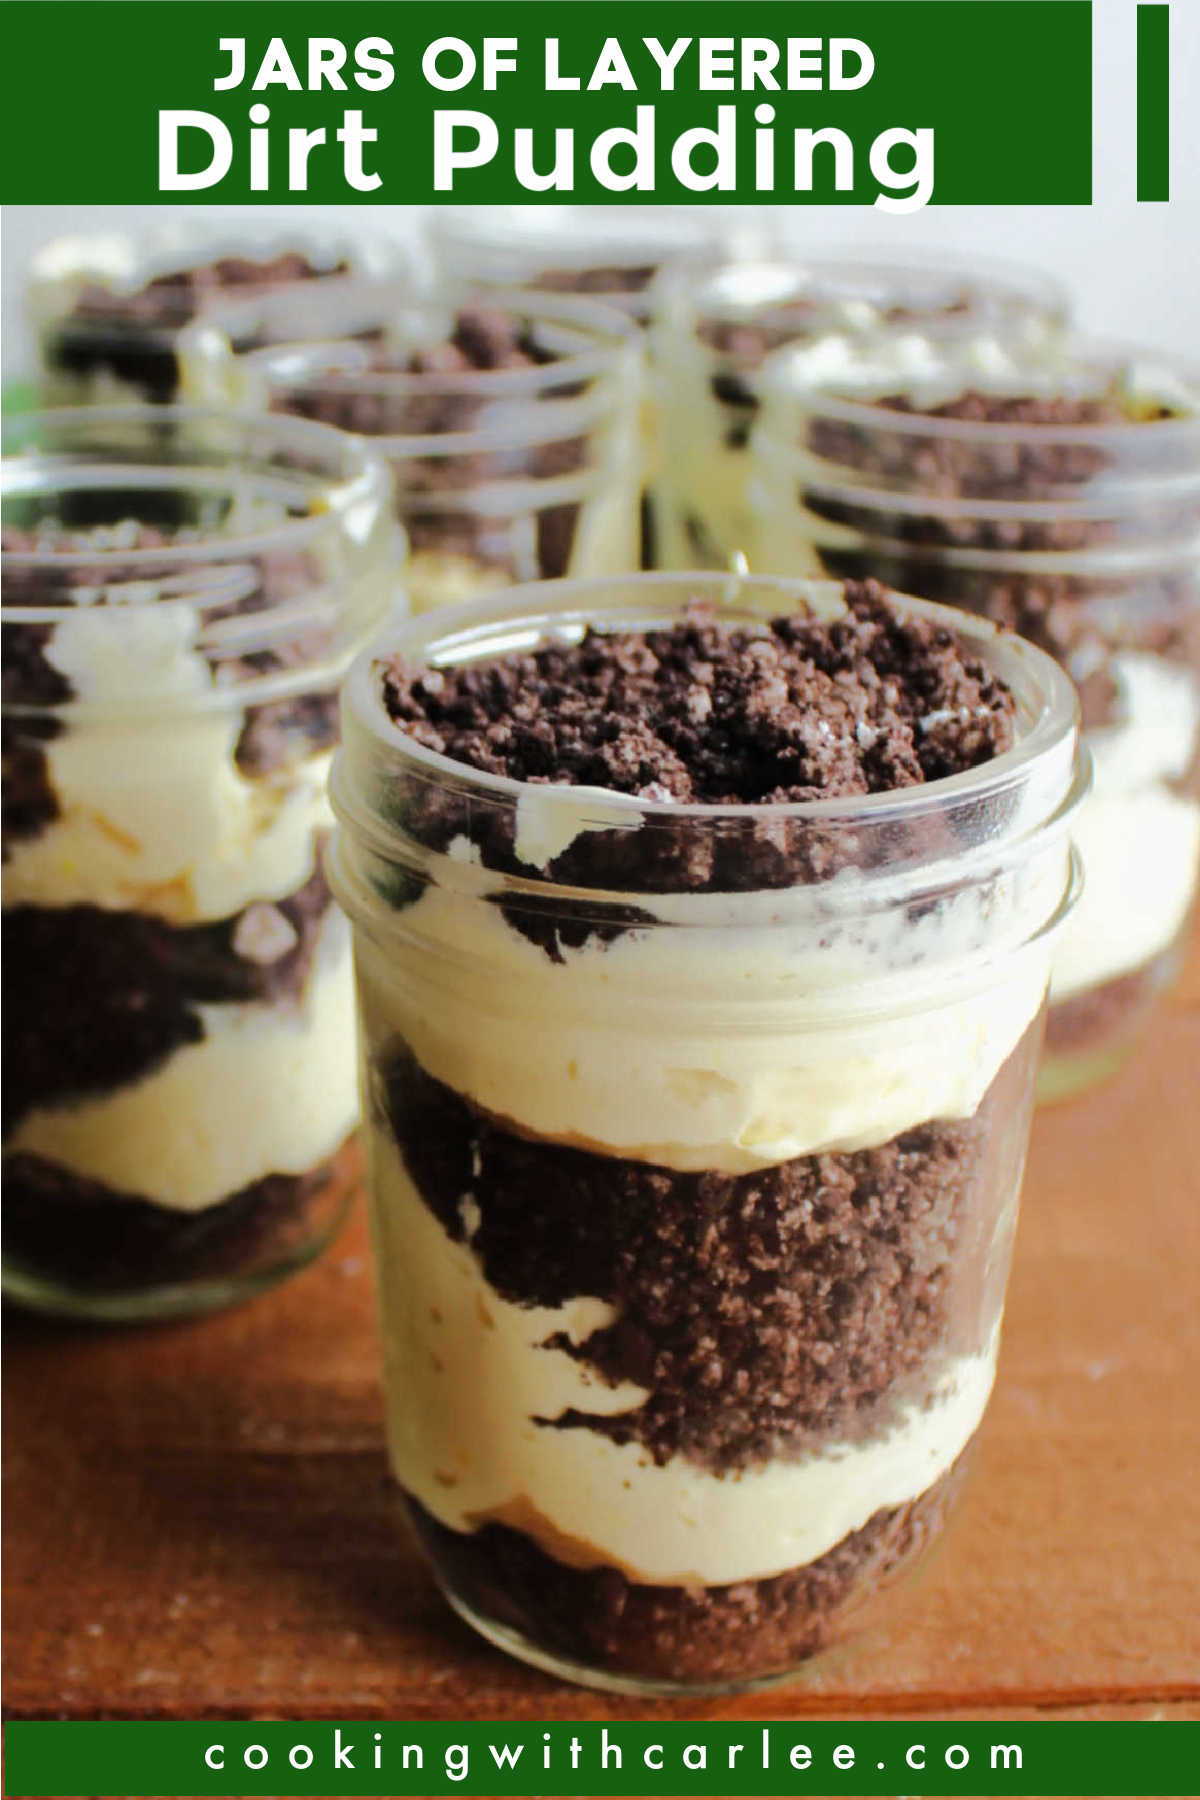 Dirt pudding jars are a childhood favorite treat that is sure to become an instant favorite again. Crushed cookies, creamy pudding and cream cheese make such a delicious no bake dessert!